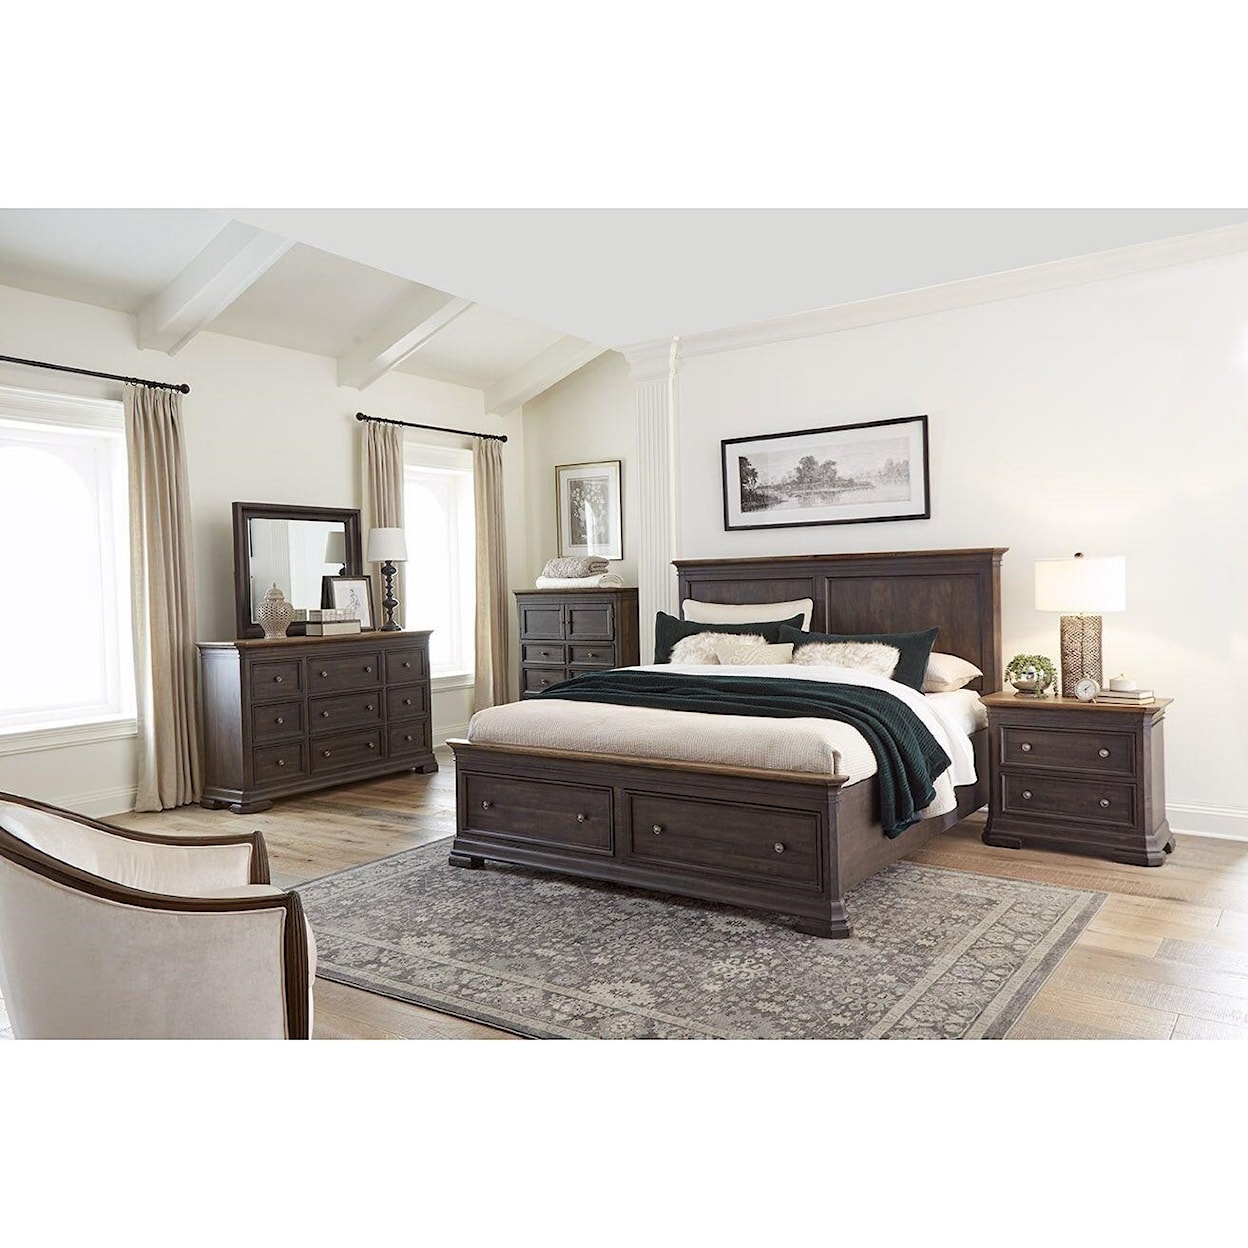 Napa Furniture Design The Grand Louie King Bedroom Group